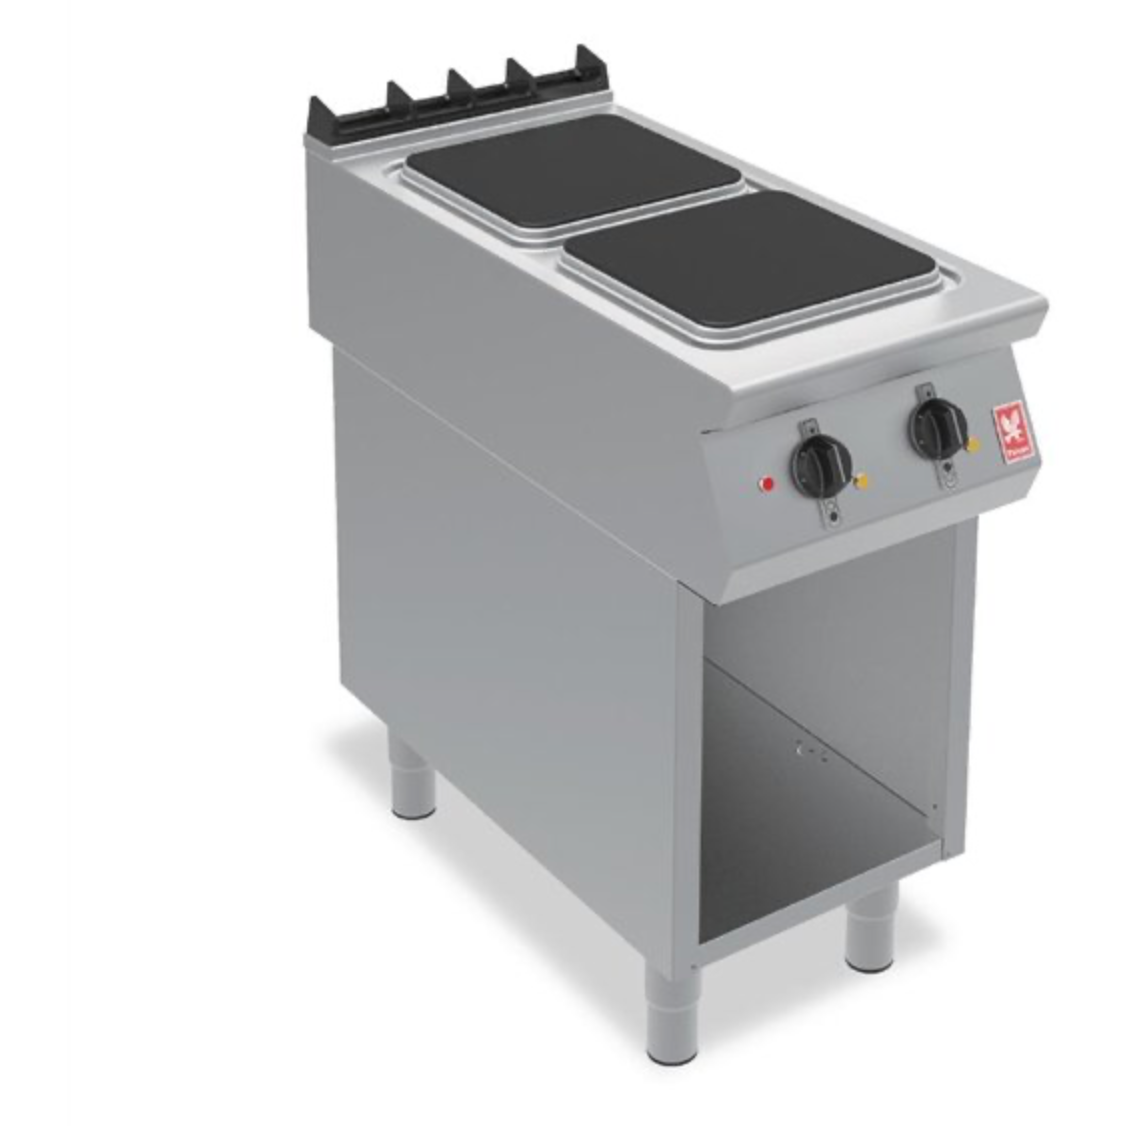 Falcon F900 Series E9042 Freestanding Electric Two Hotplate Boiling Top 8kW